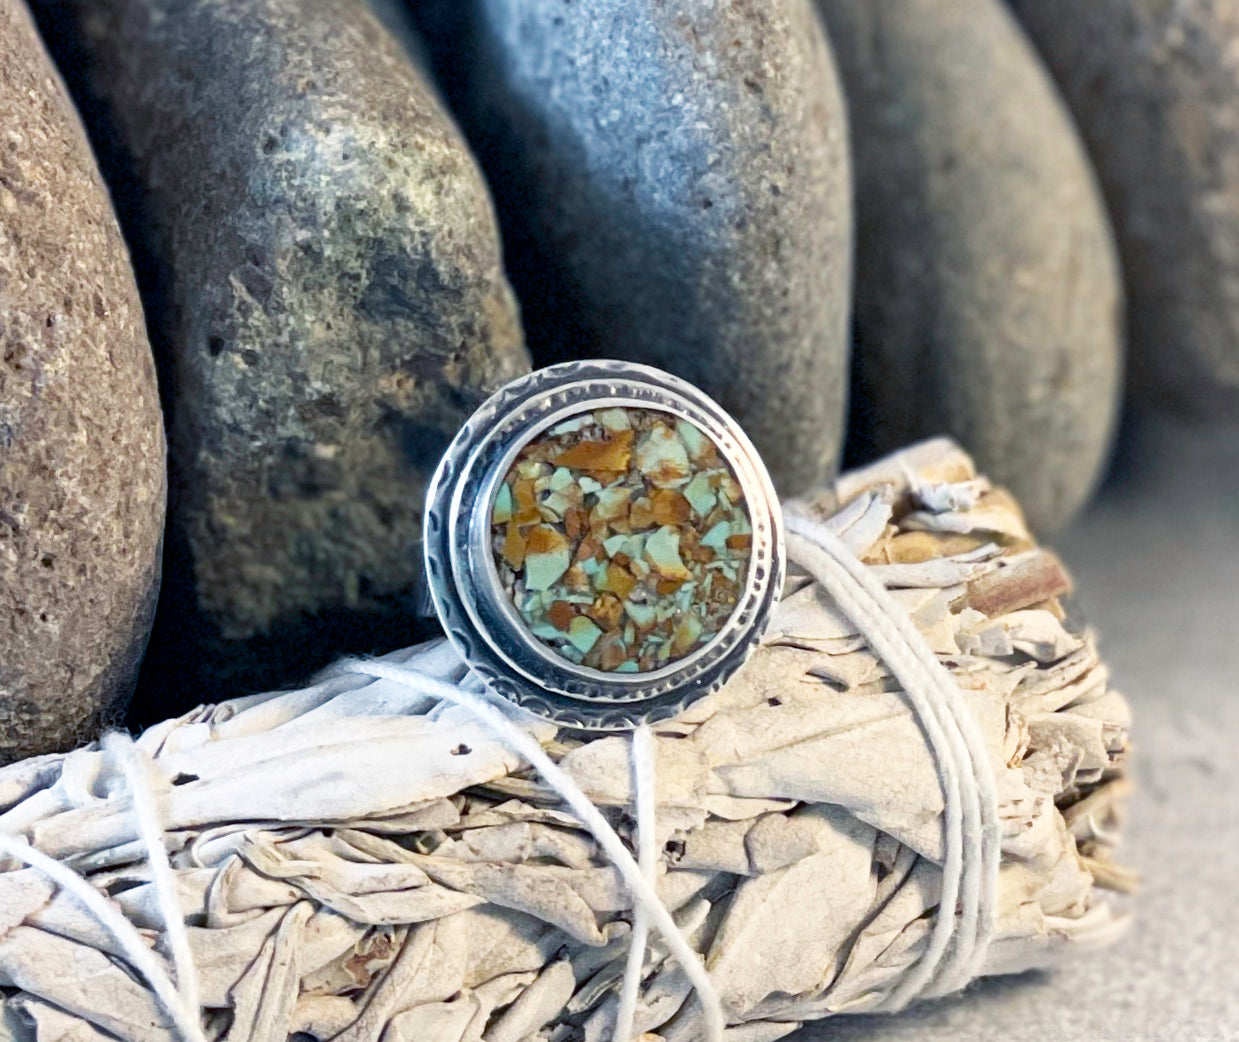 Natural Inlay Turquoise Sterling Silver Ring